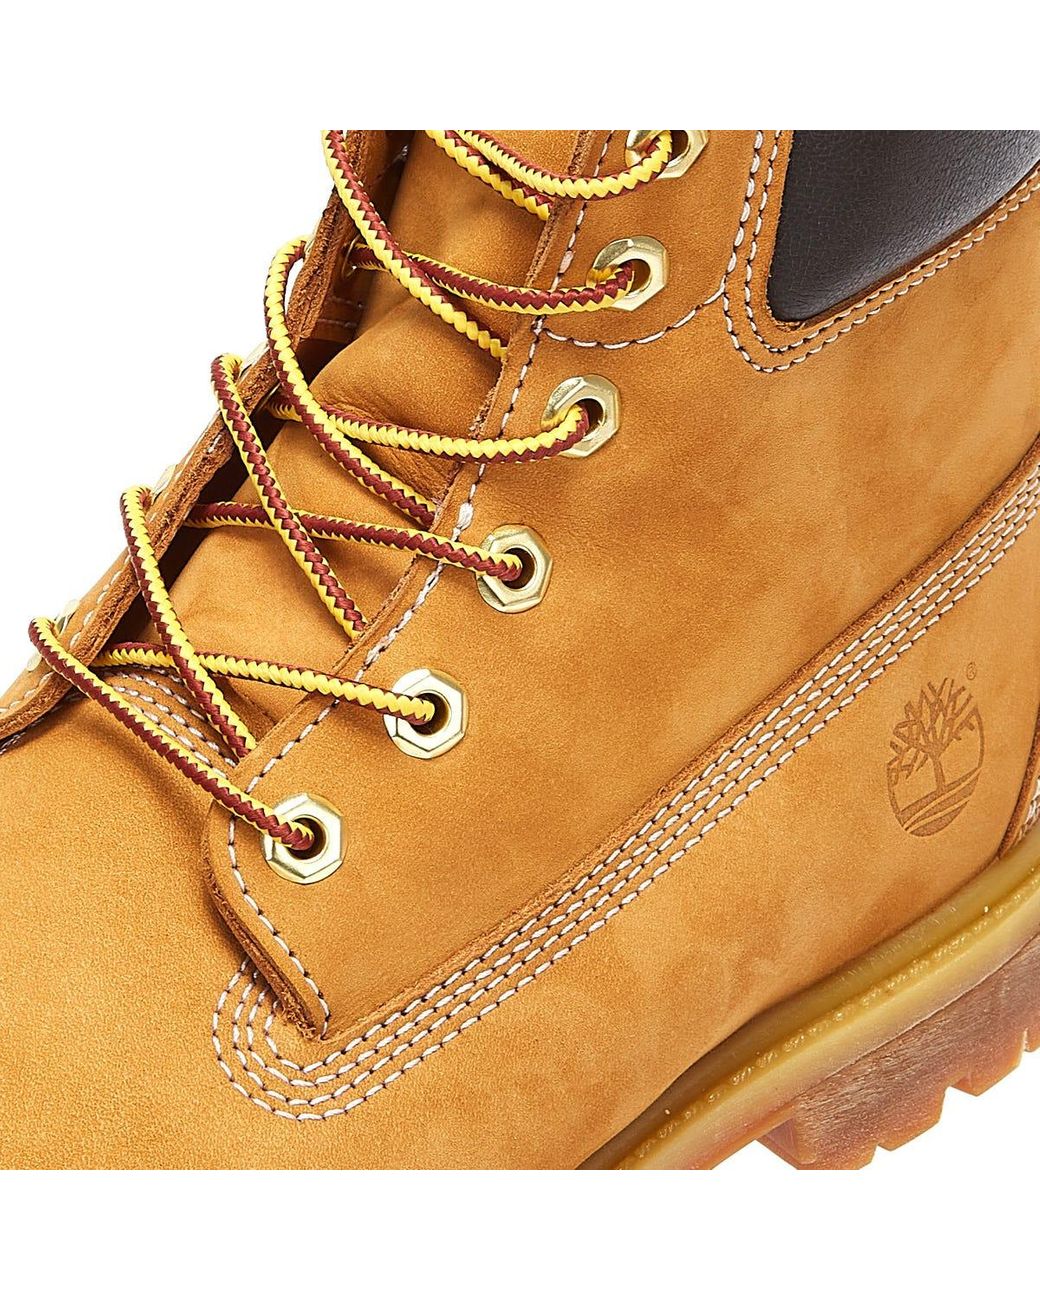 Timberland Wheat Premium 6 Inch Nubuck Leather Boots in Tan (Brown) - Save  21% - Lyst